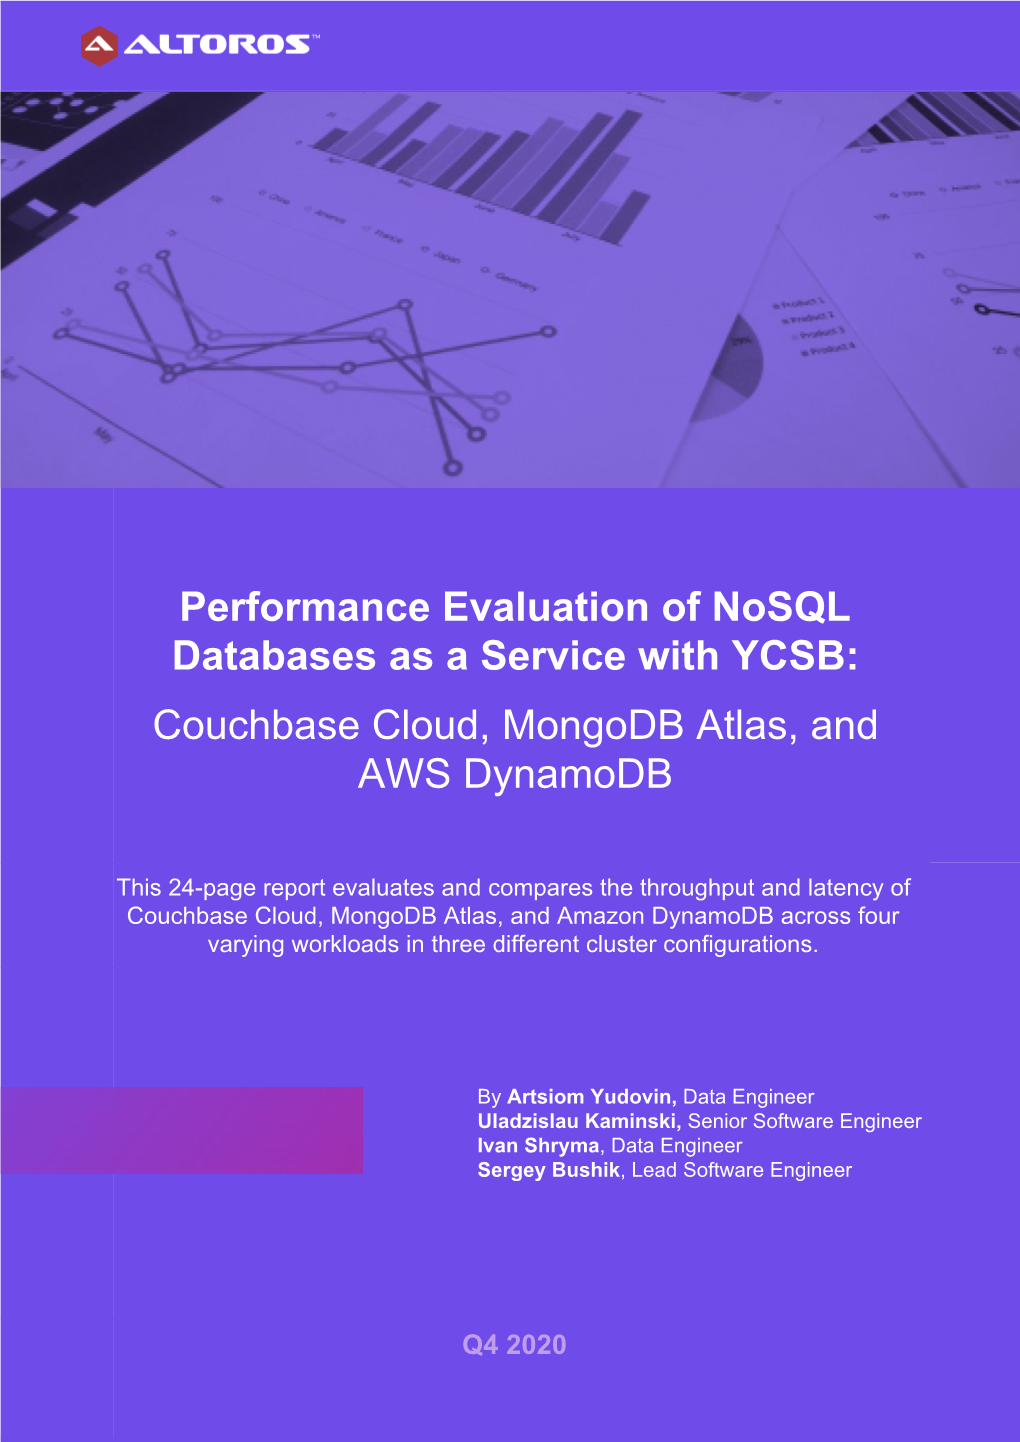 Performance Evaluation of Nosql Databases As a Service with YCSB: Couchbase Cloud, Mongodb Atlas, and AWS Dynamodb